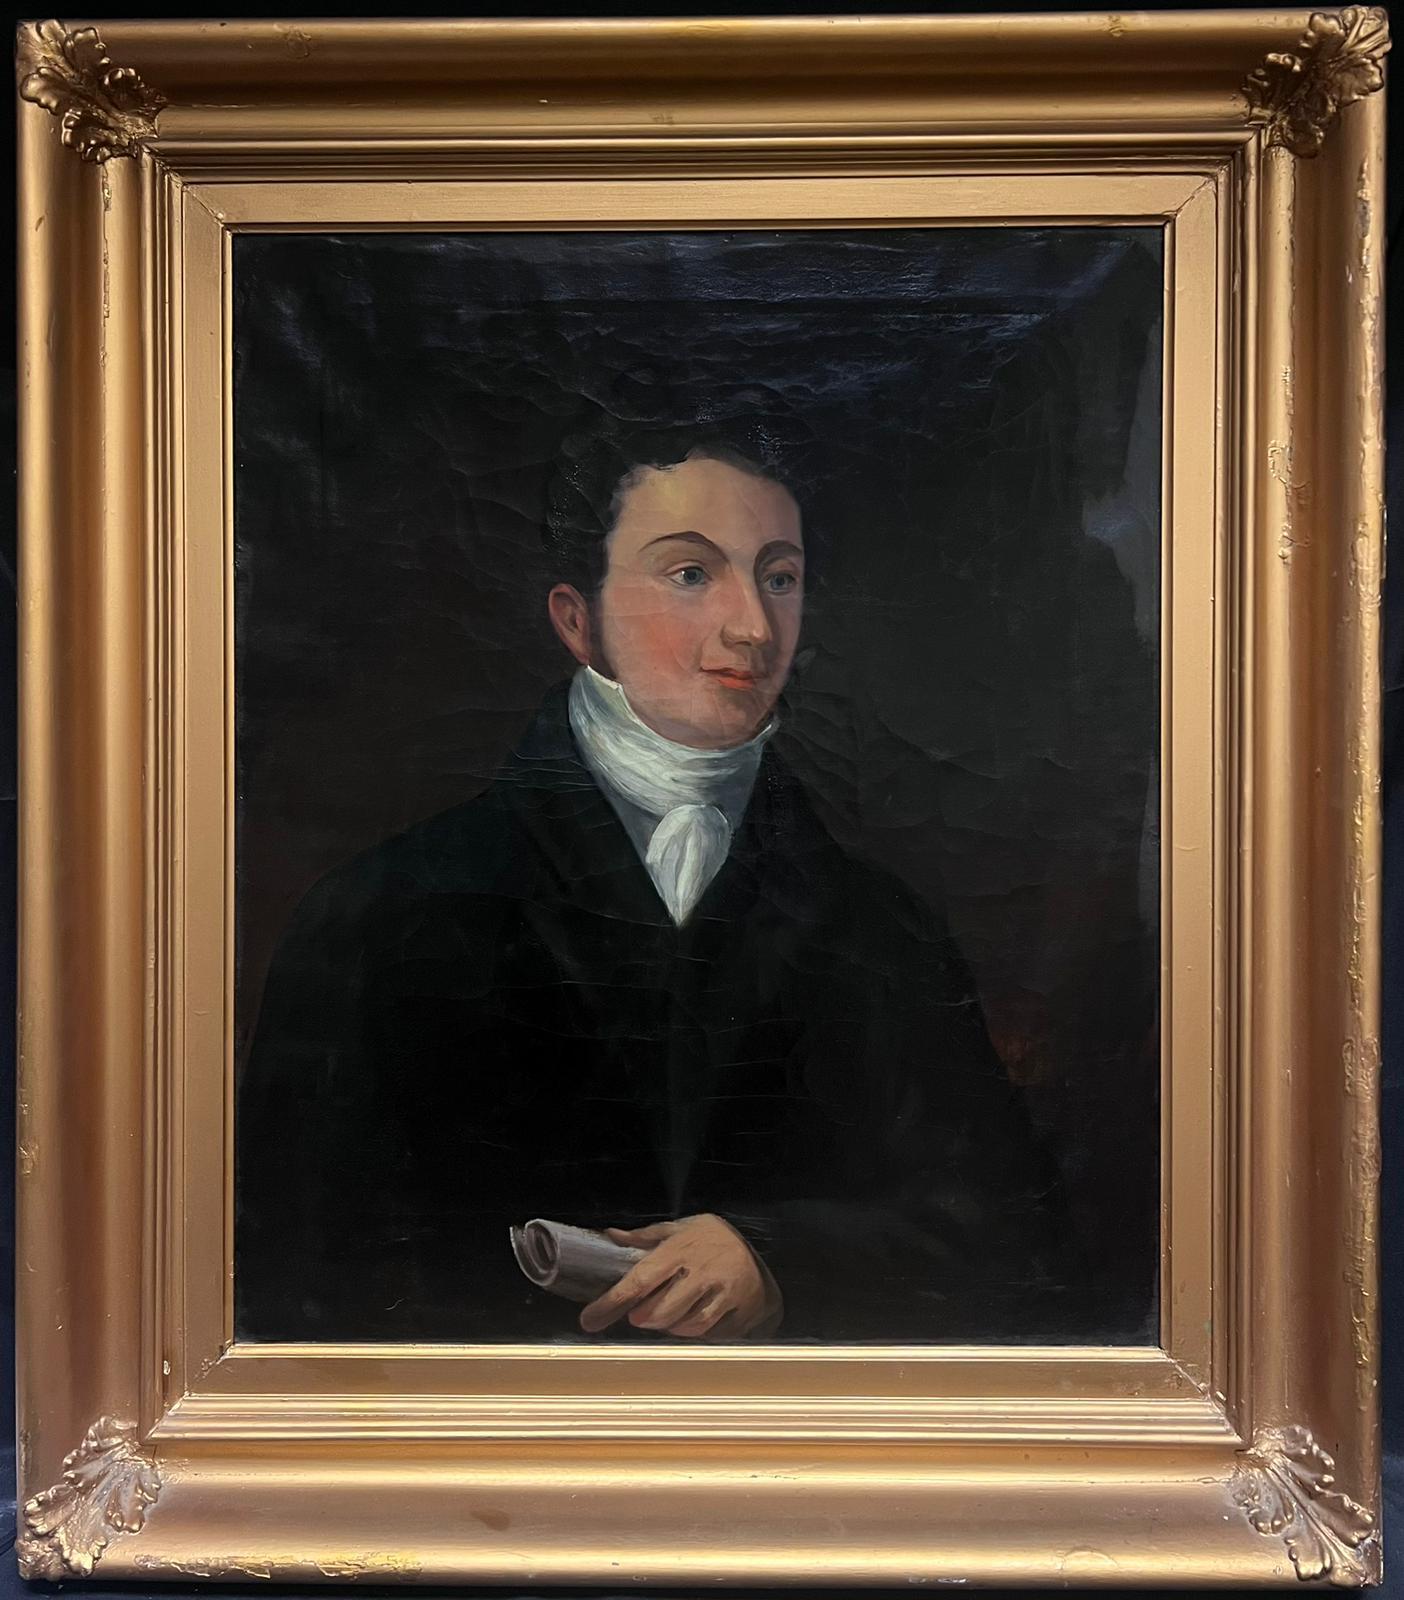 English 1820's Portrait Painting - Very Large 1820's English Portrait Dapper Young Gentleman Period Drama Oil